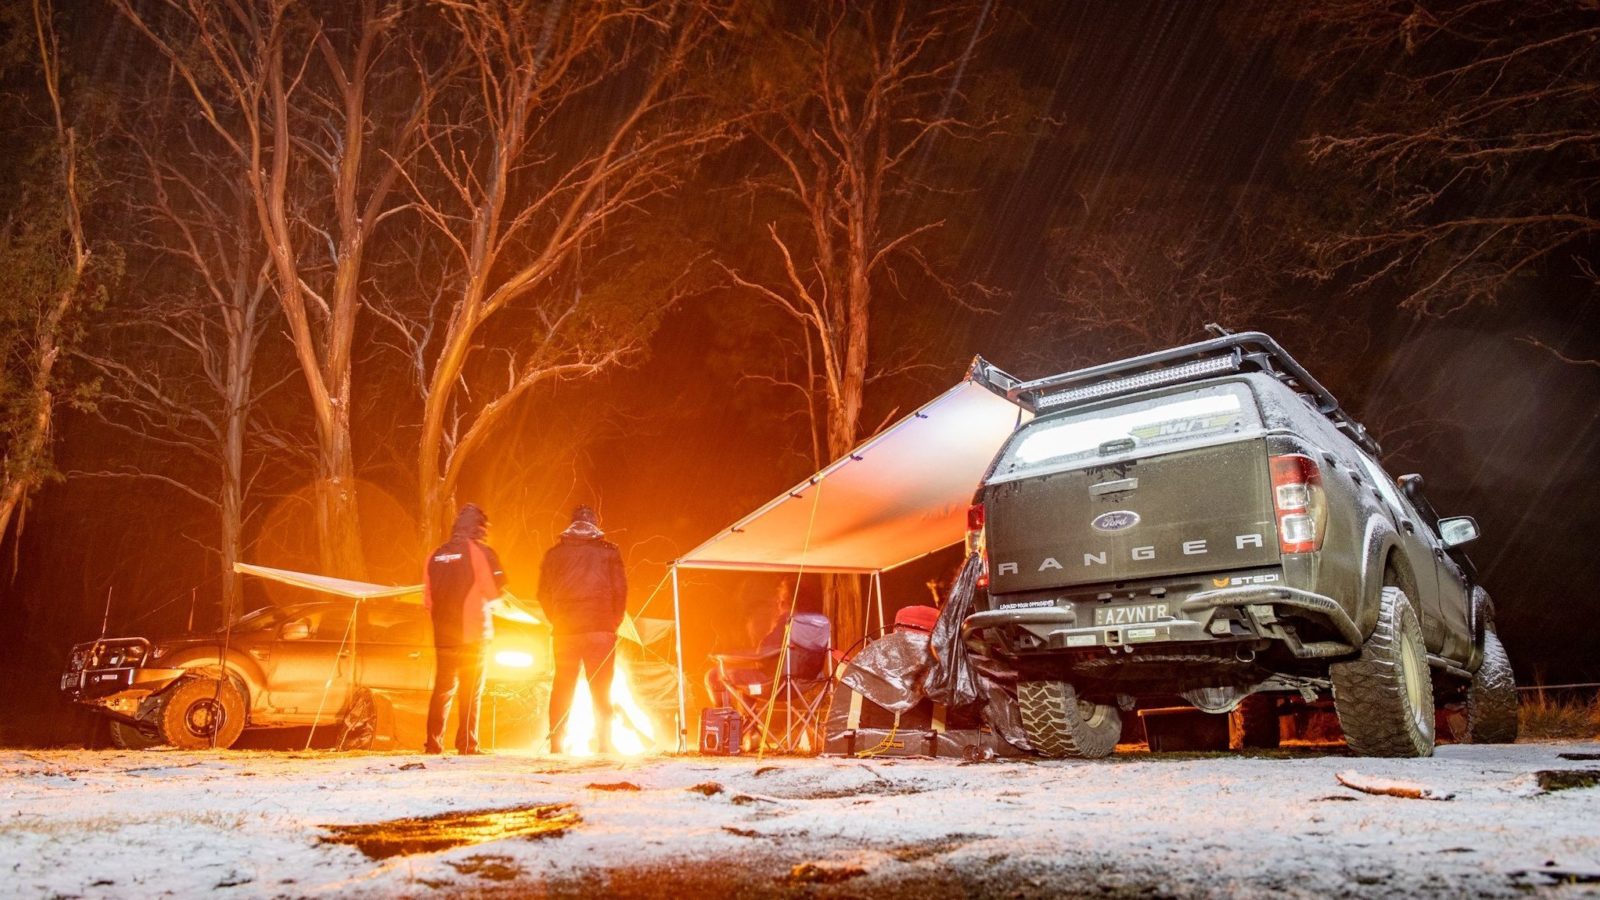 Polblue campground is one of the few places you can camp in snow. Image IG/@azventuresaustralia